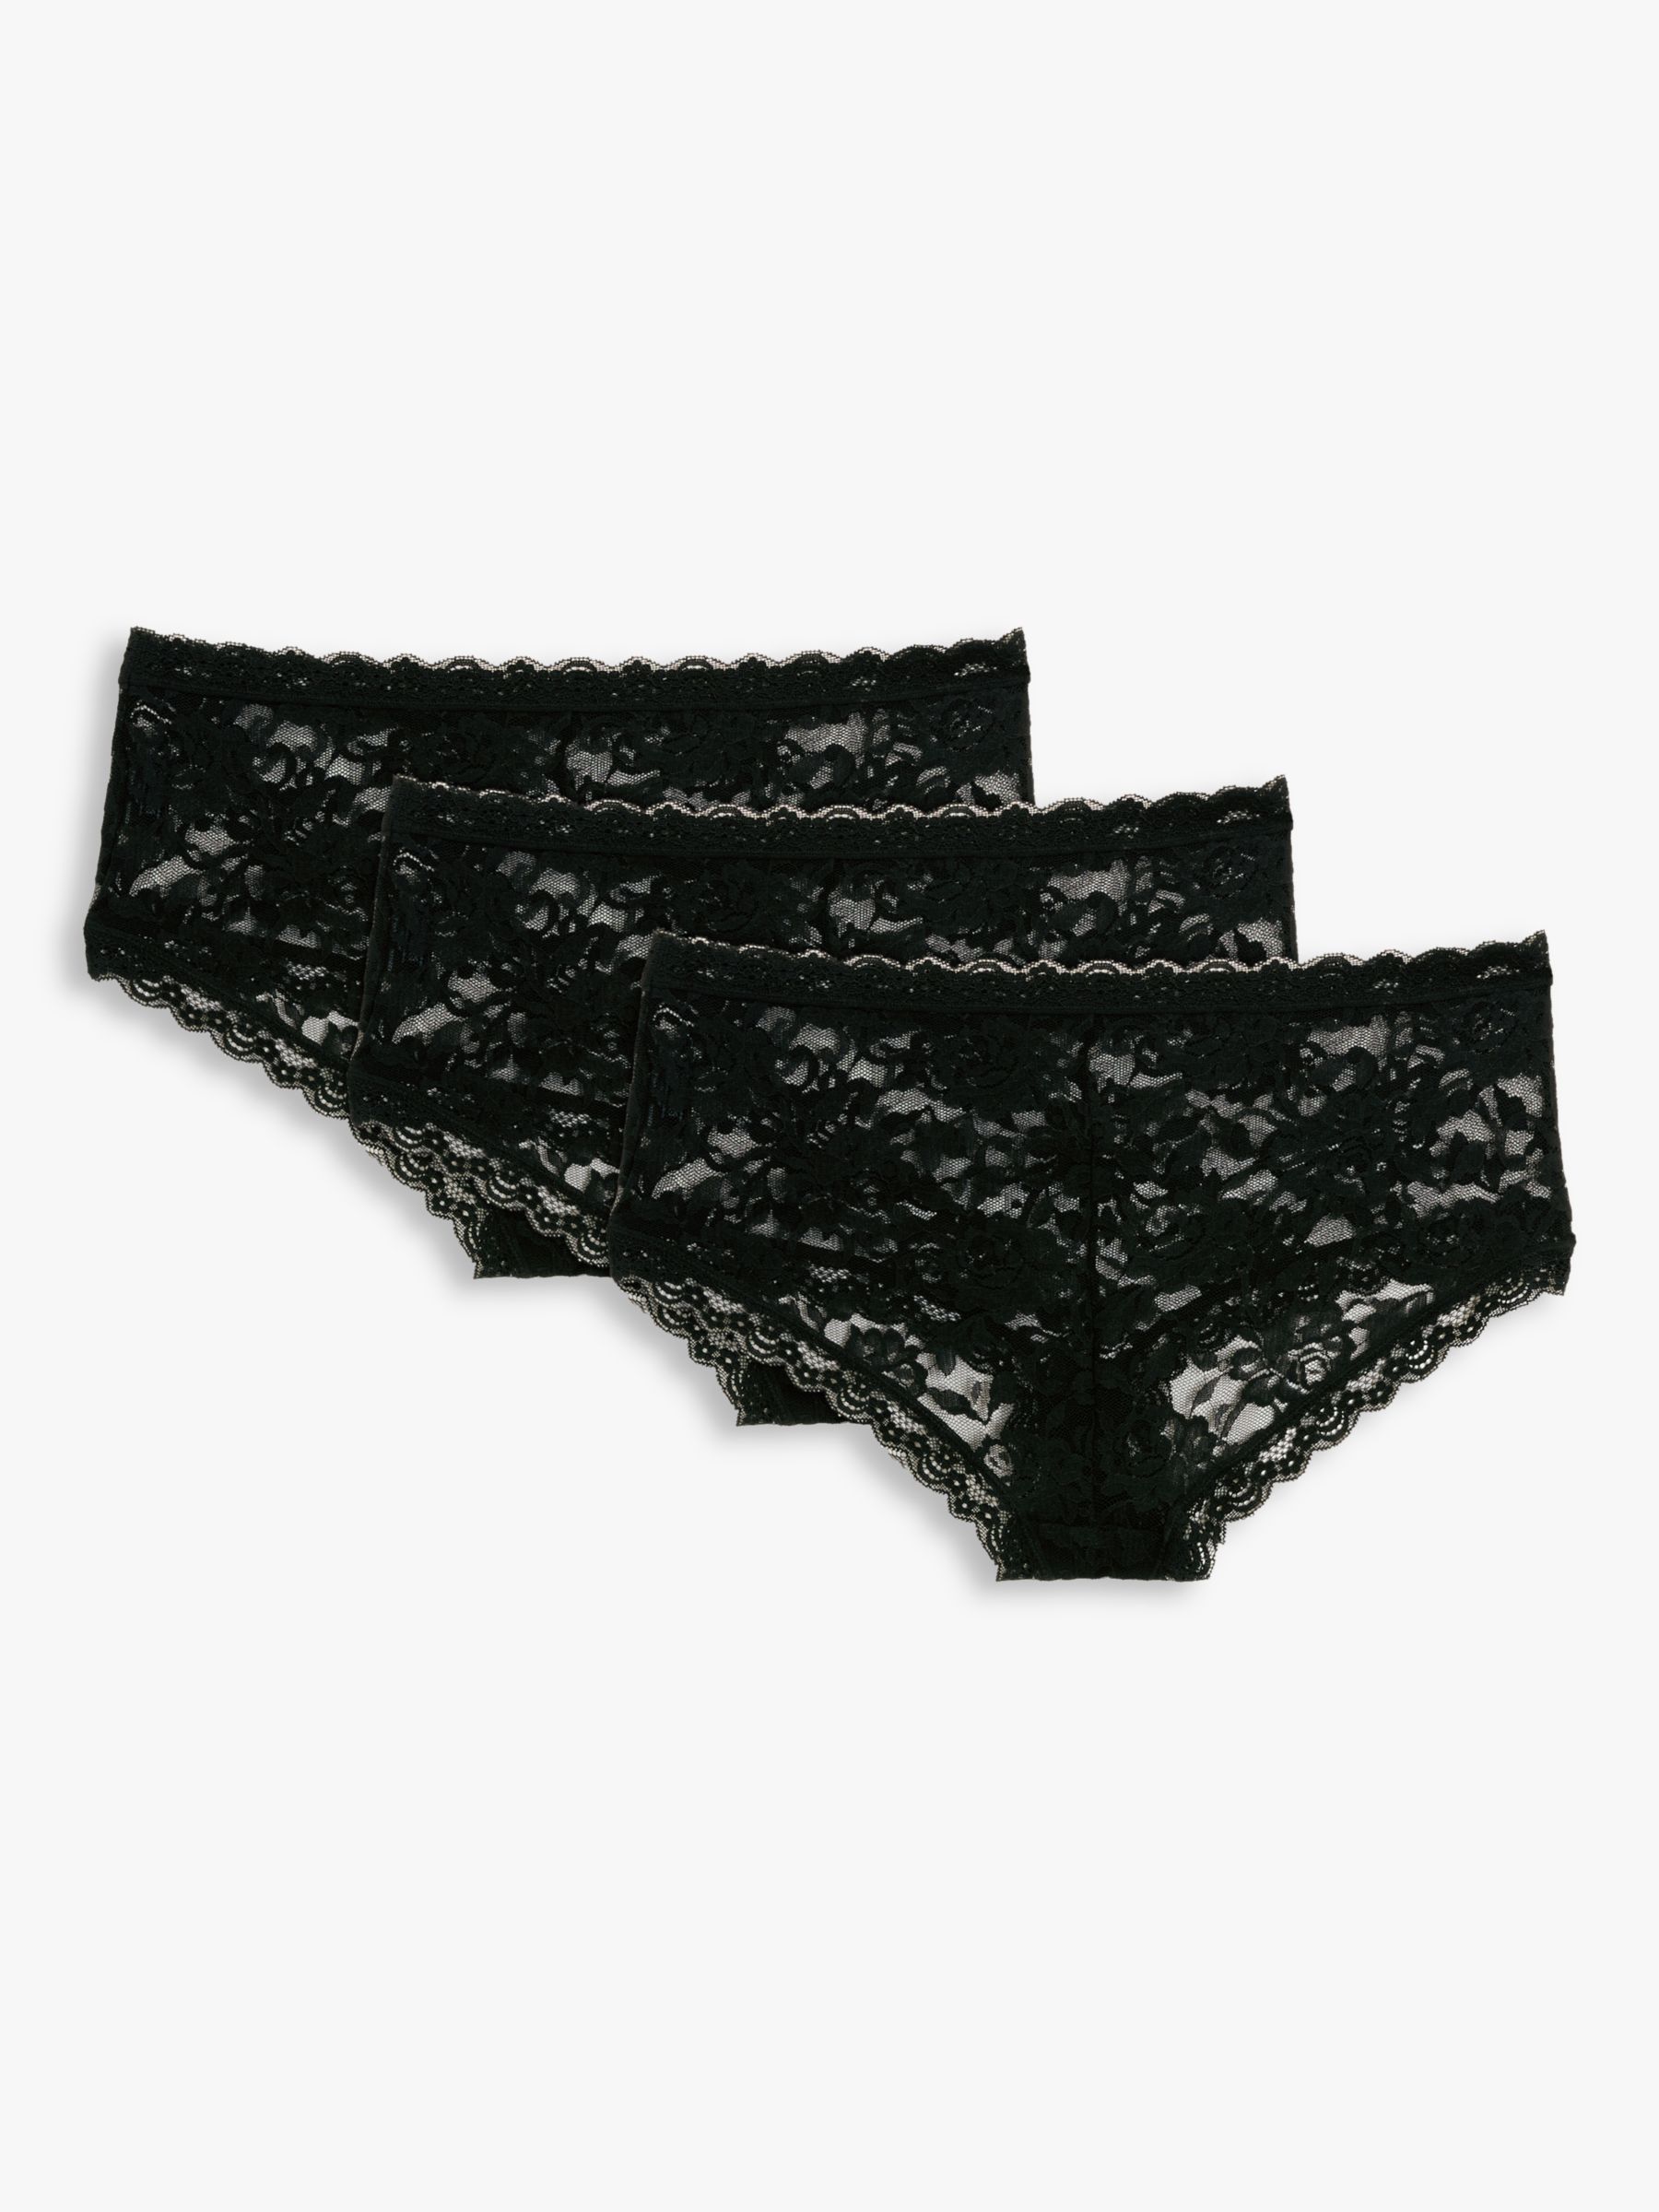 Women's 5 Pack Floral Lace Mid Rise Boyshort Panties Sexy Scallop